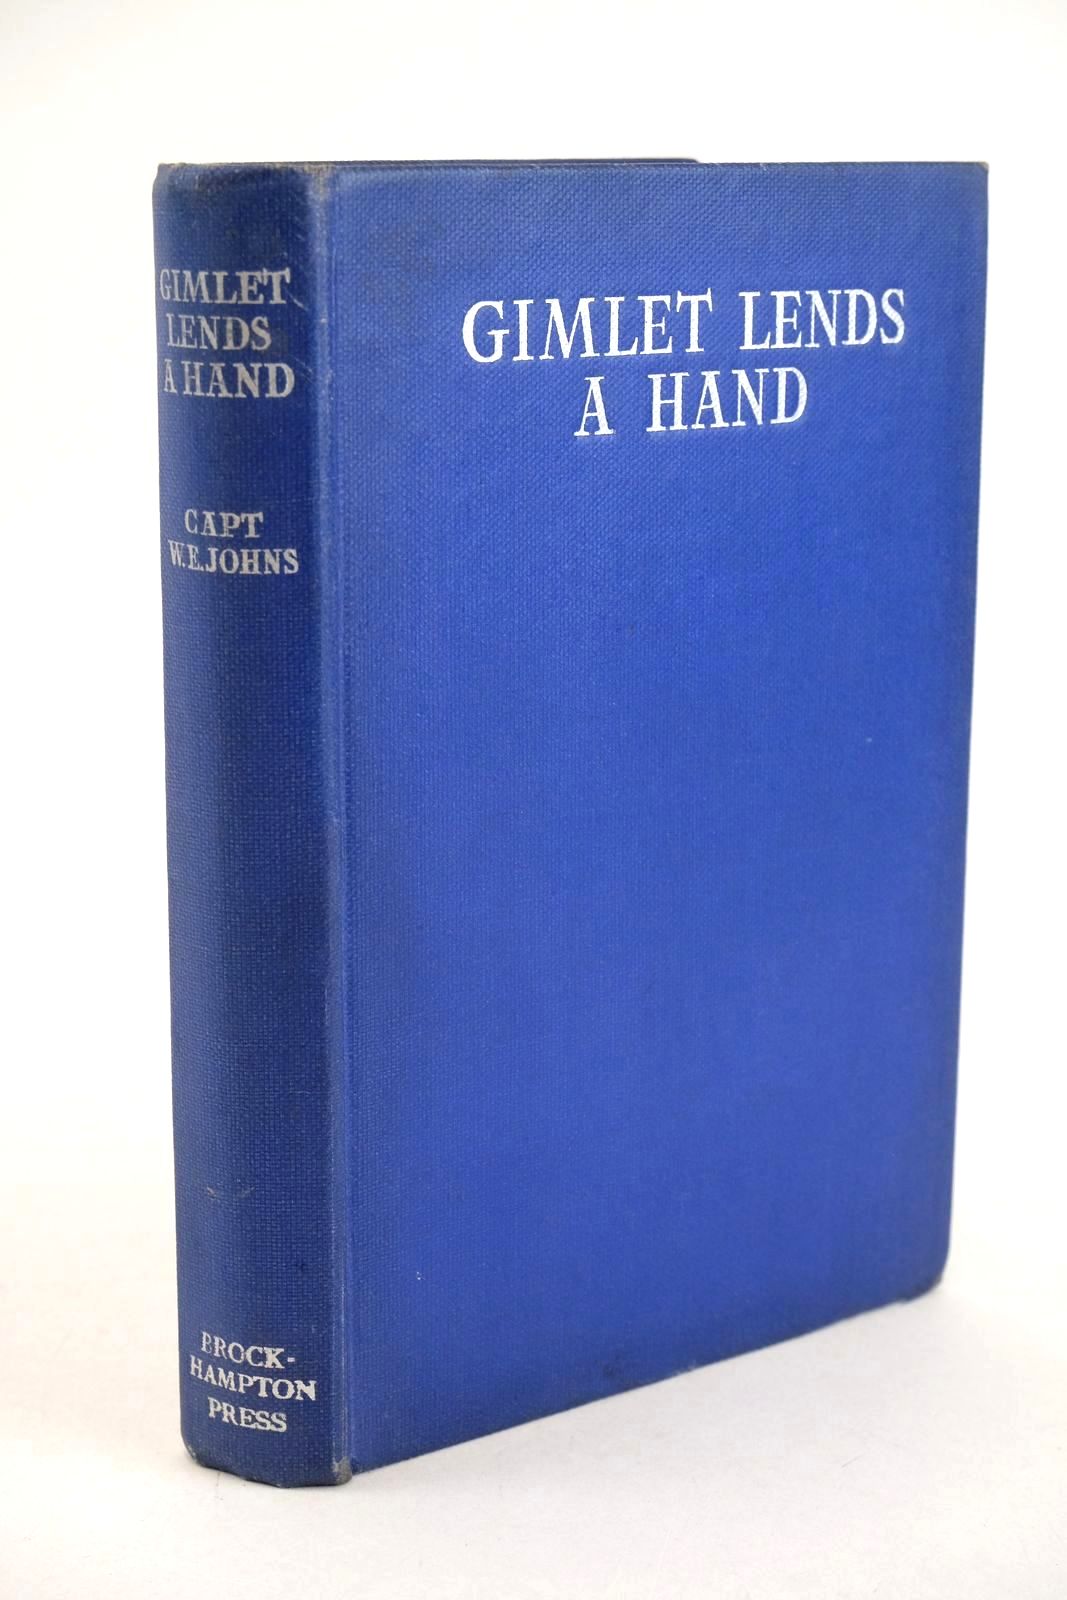 Photo of GIMLET LENDS A HAND written by Johns, W.E. illustrated by Stead, Leslie published by Brockhampton Press (STOCK CODE: 1327270)  for sale by Stella & Rose's Books